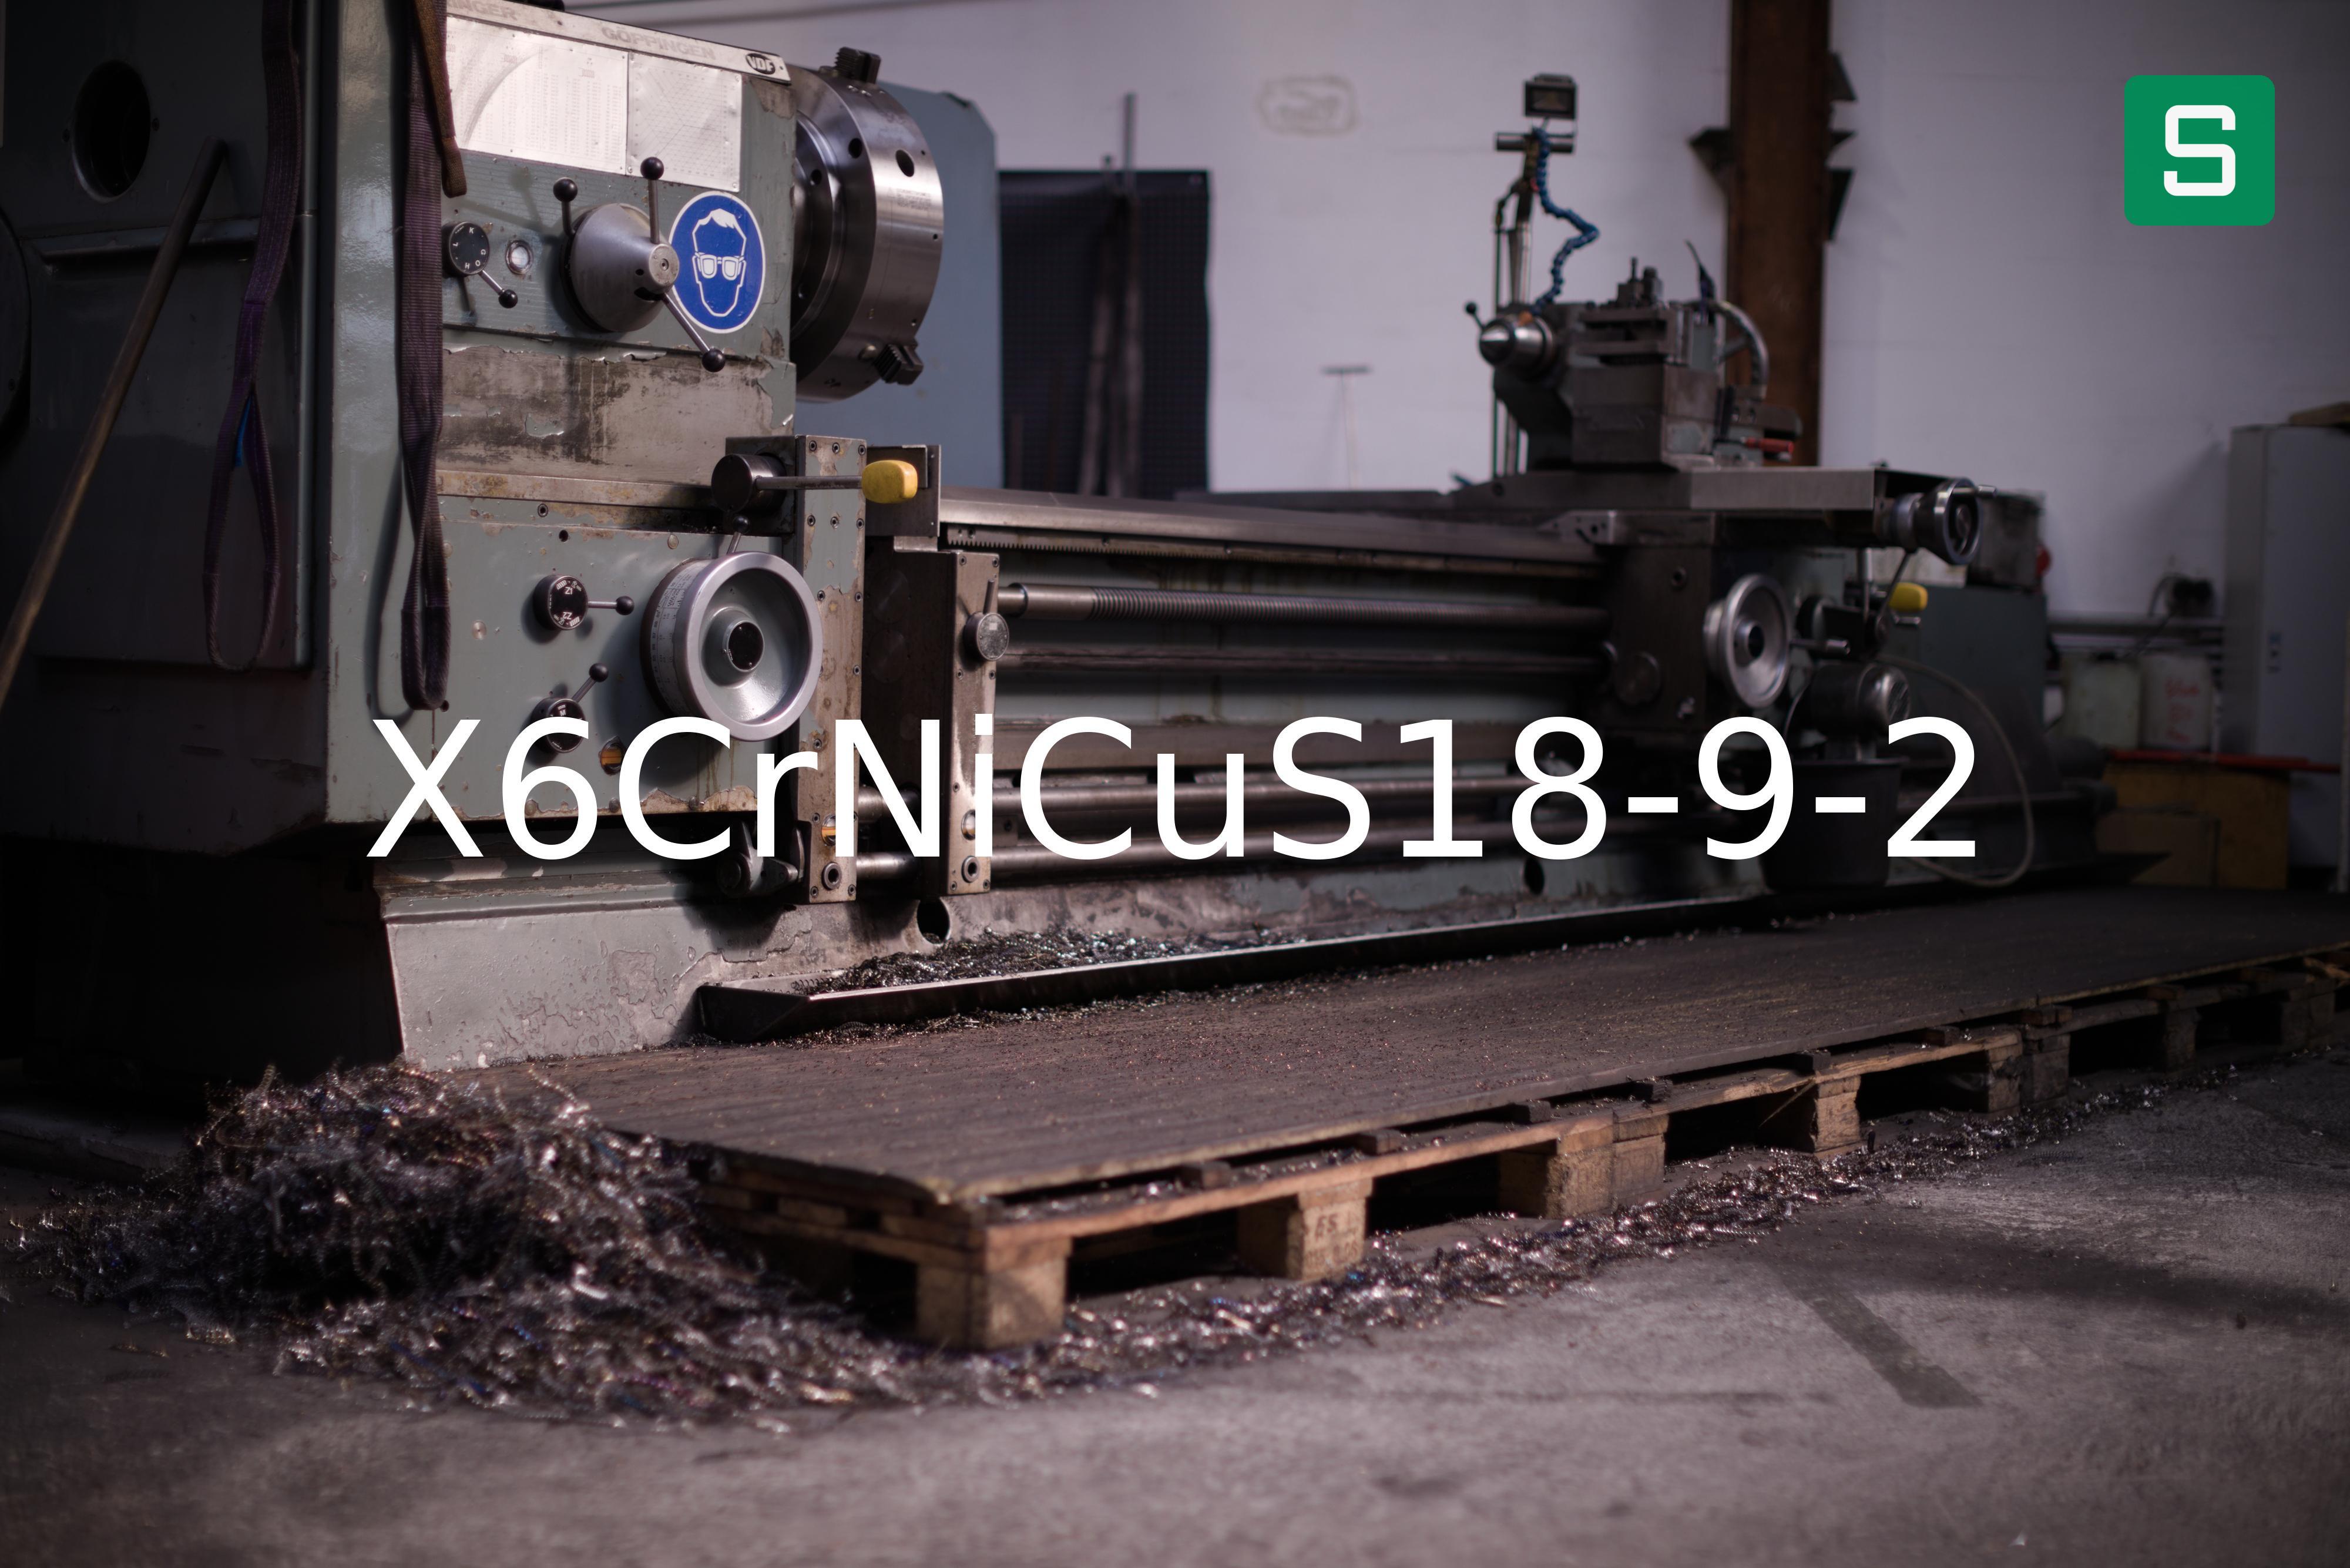 Steel Material: X6CrNiCuS18-9-2